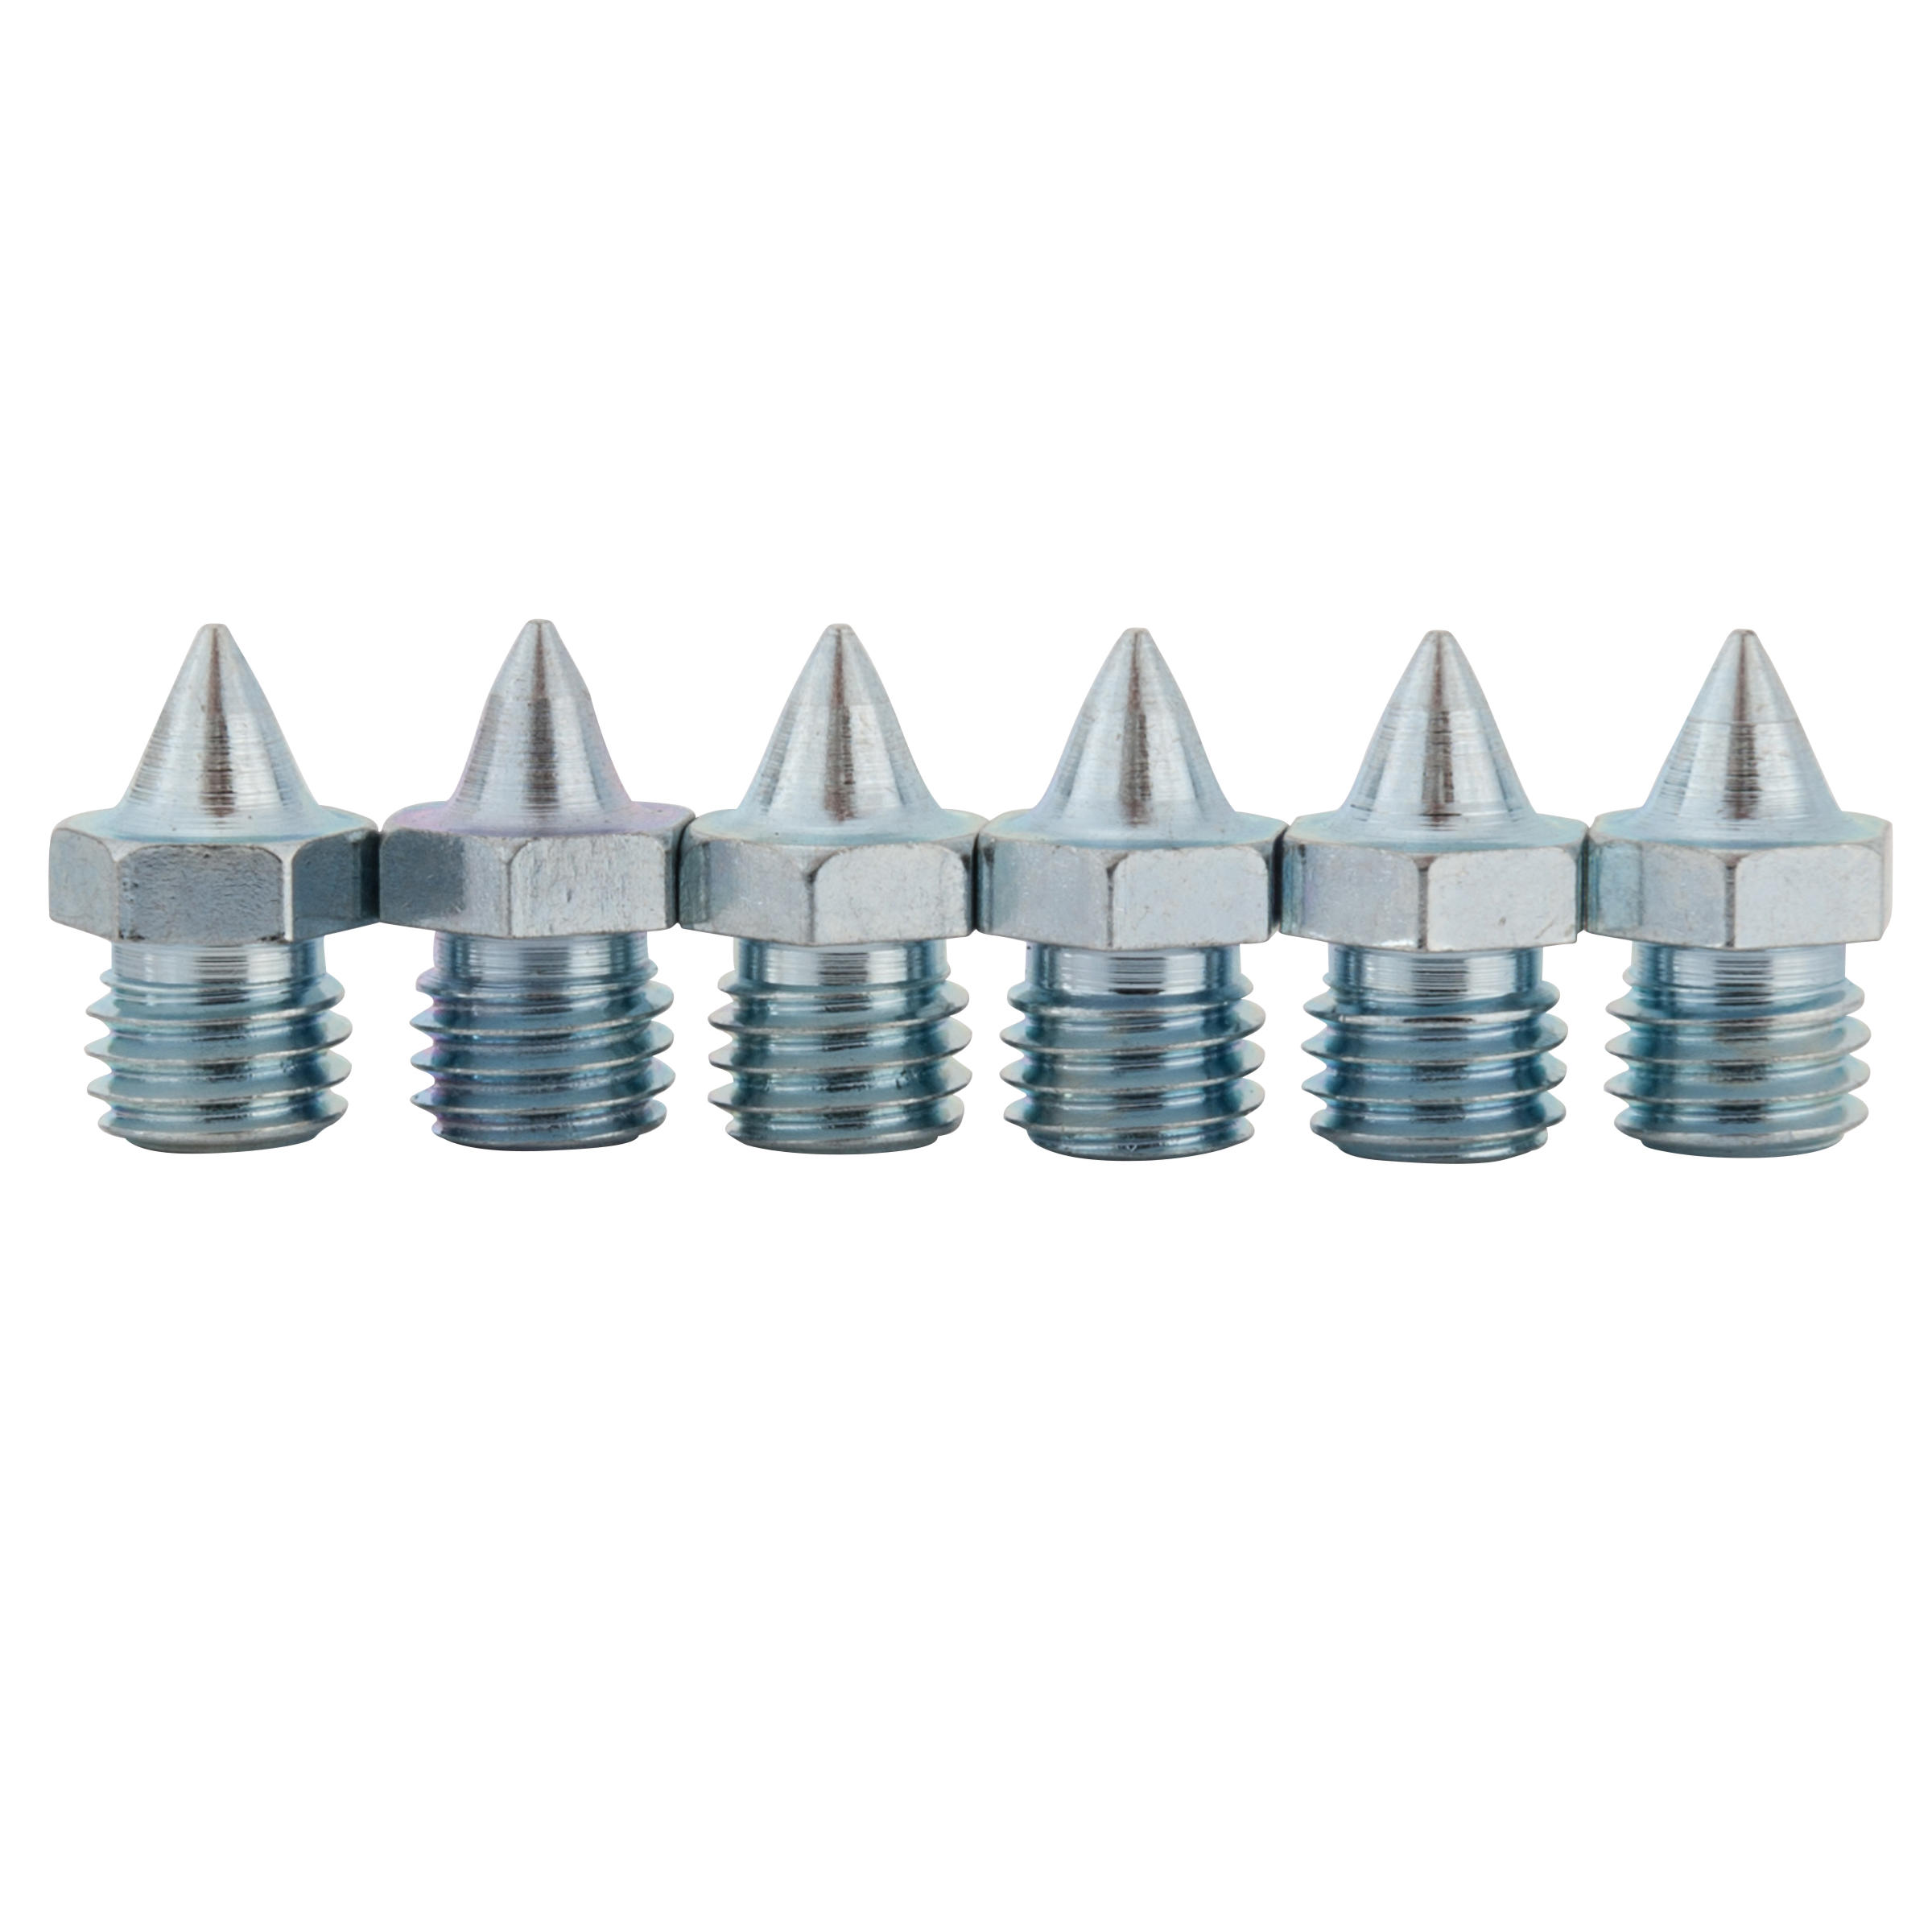 6mm spikes for track